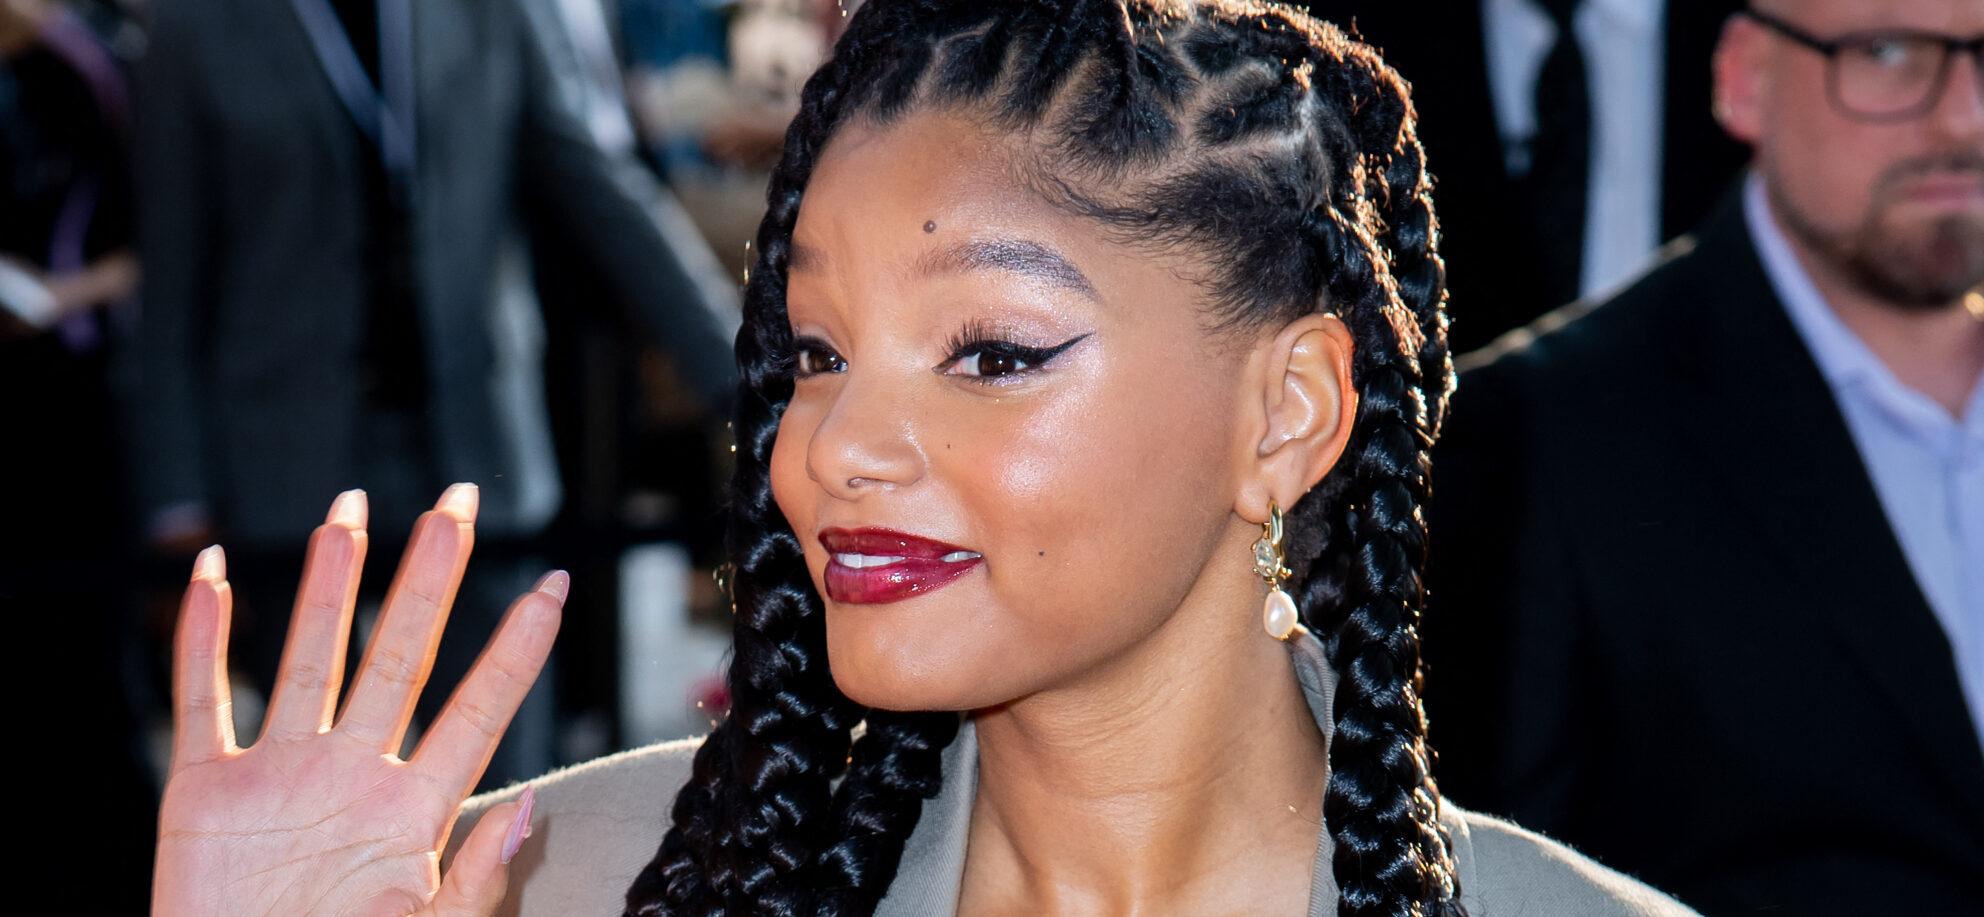 Halle Bailey’s Latest Instagram Post Stirs Up Controversy